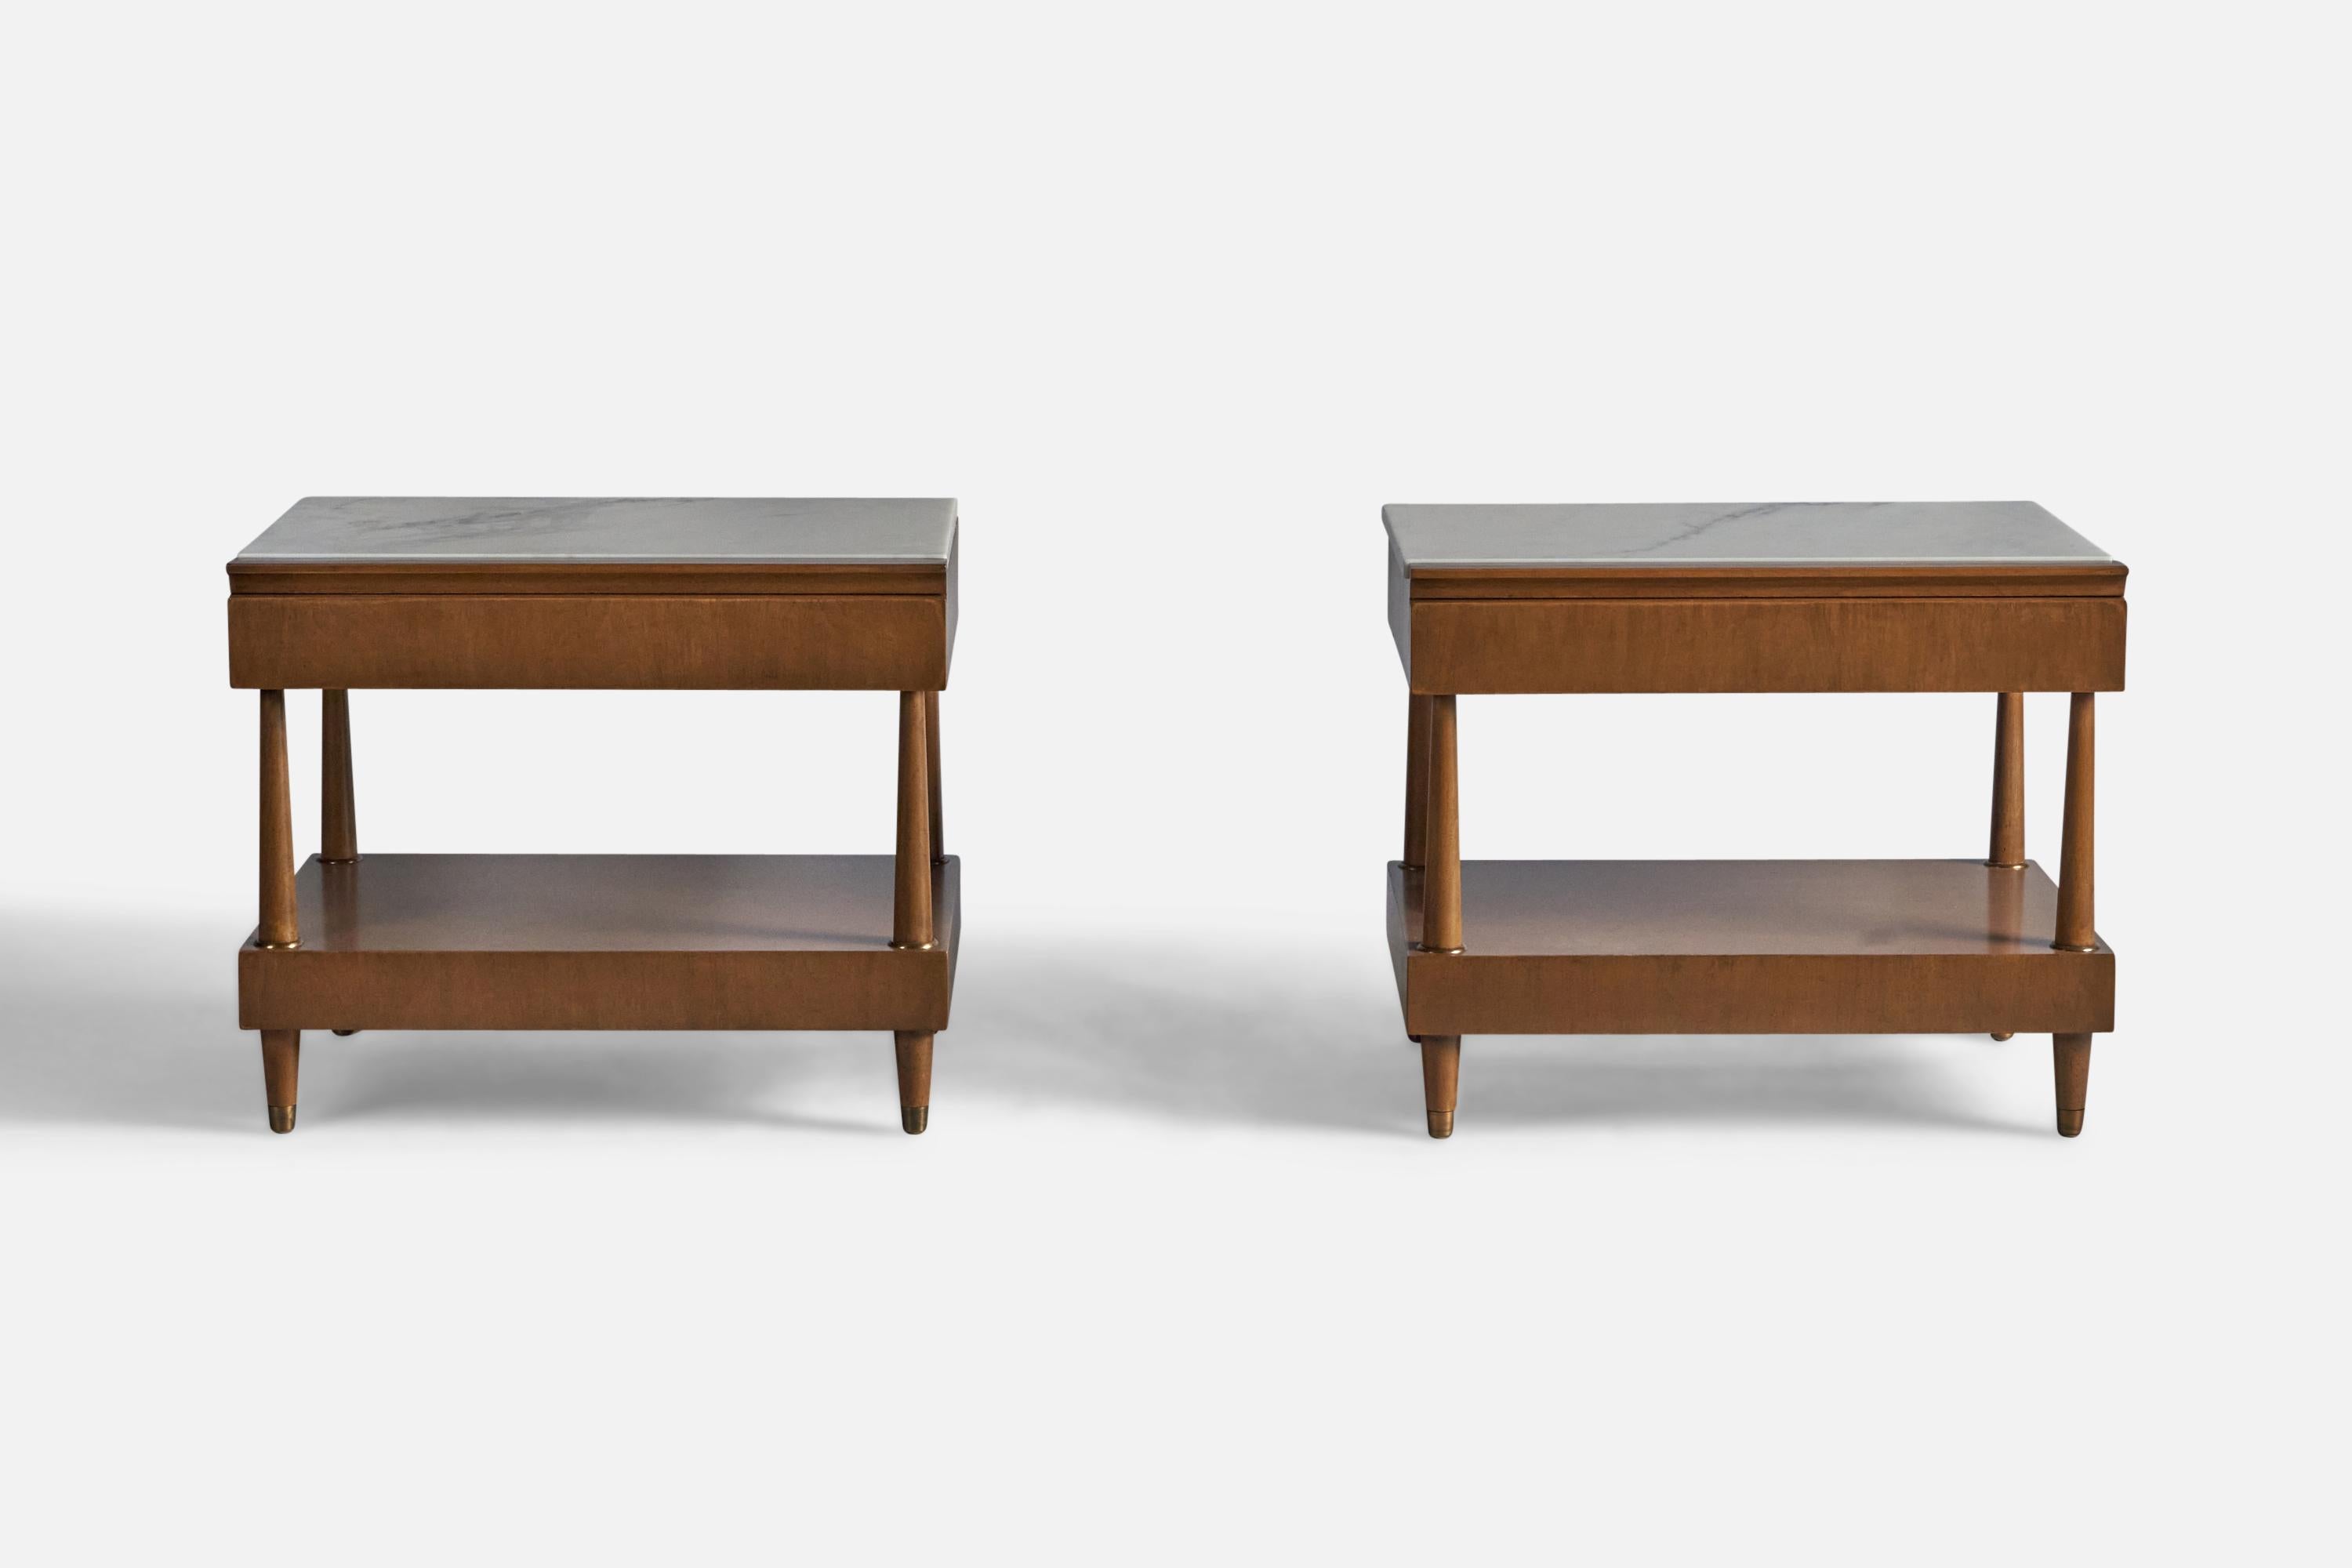 A pair of walnut and Carrara marble side table or nightstands, designed and produced in the US, c. 1950s.